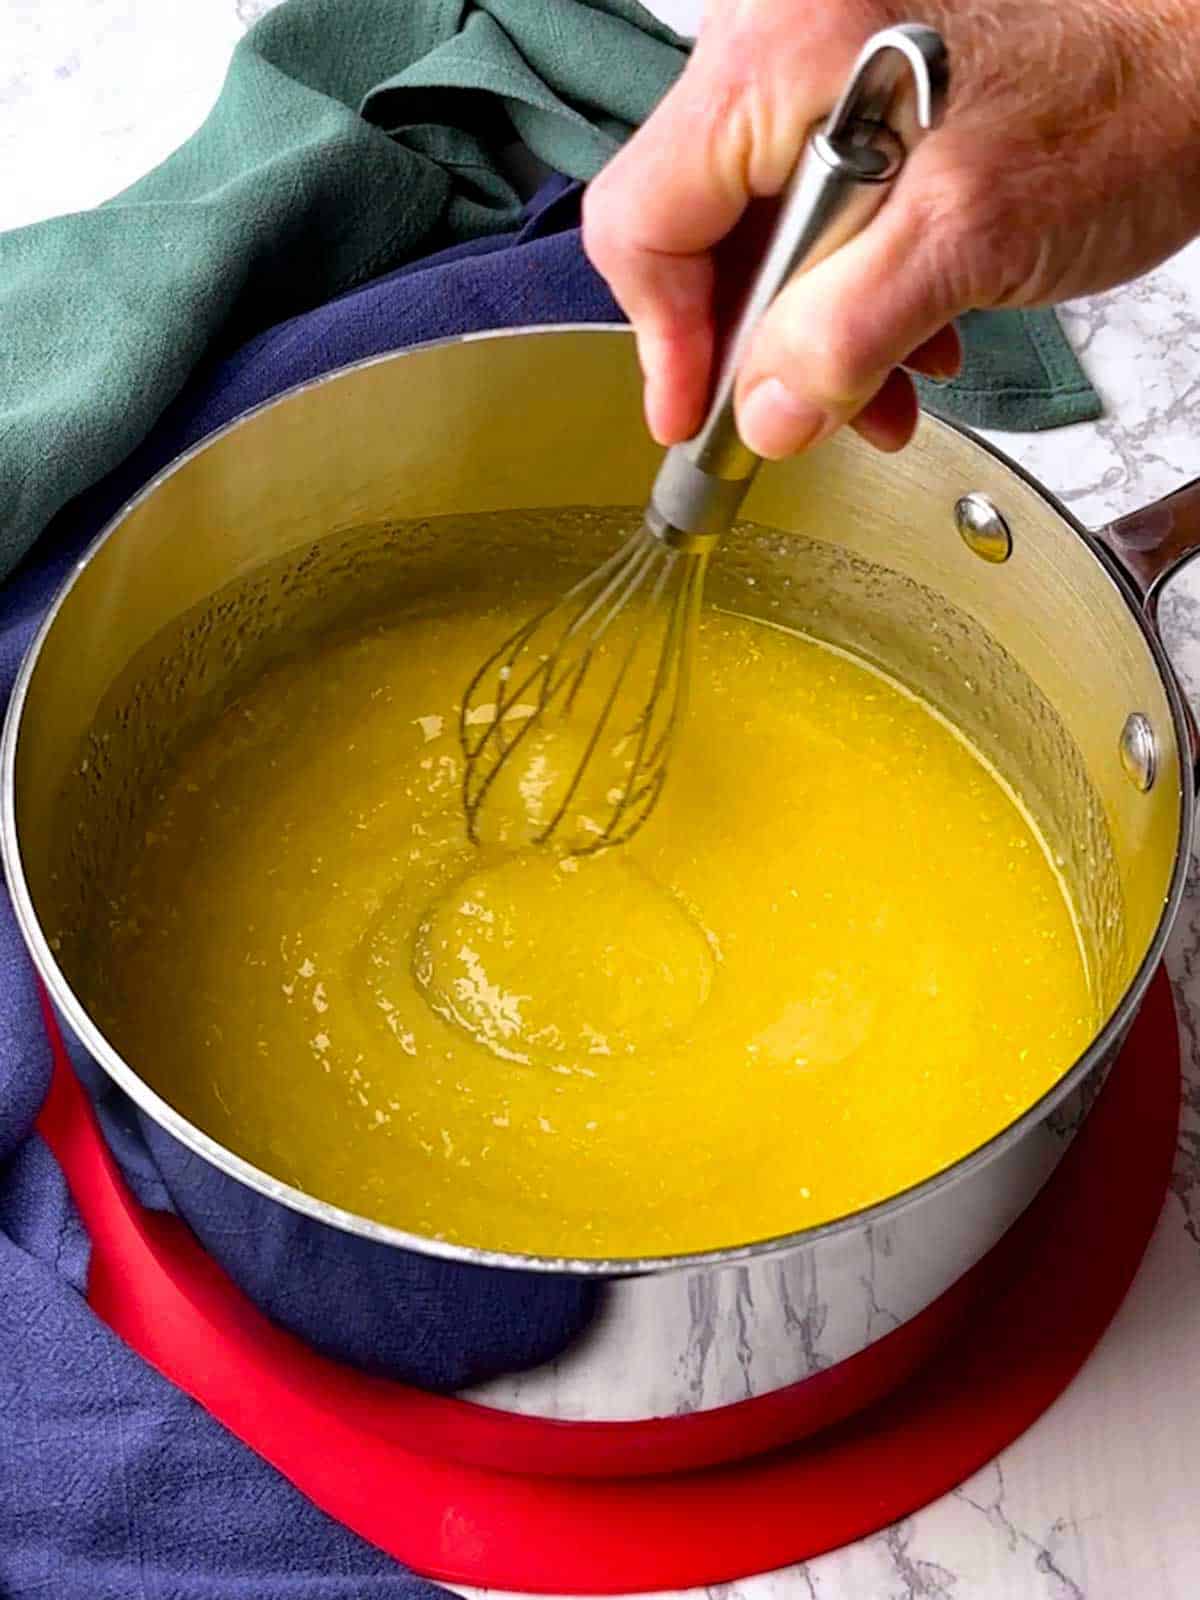 Whisking the butter, sugar and vanilla extract together.